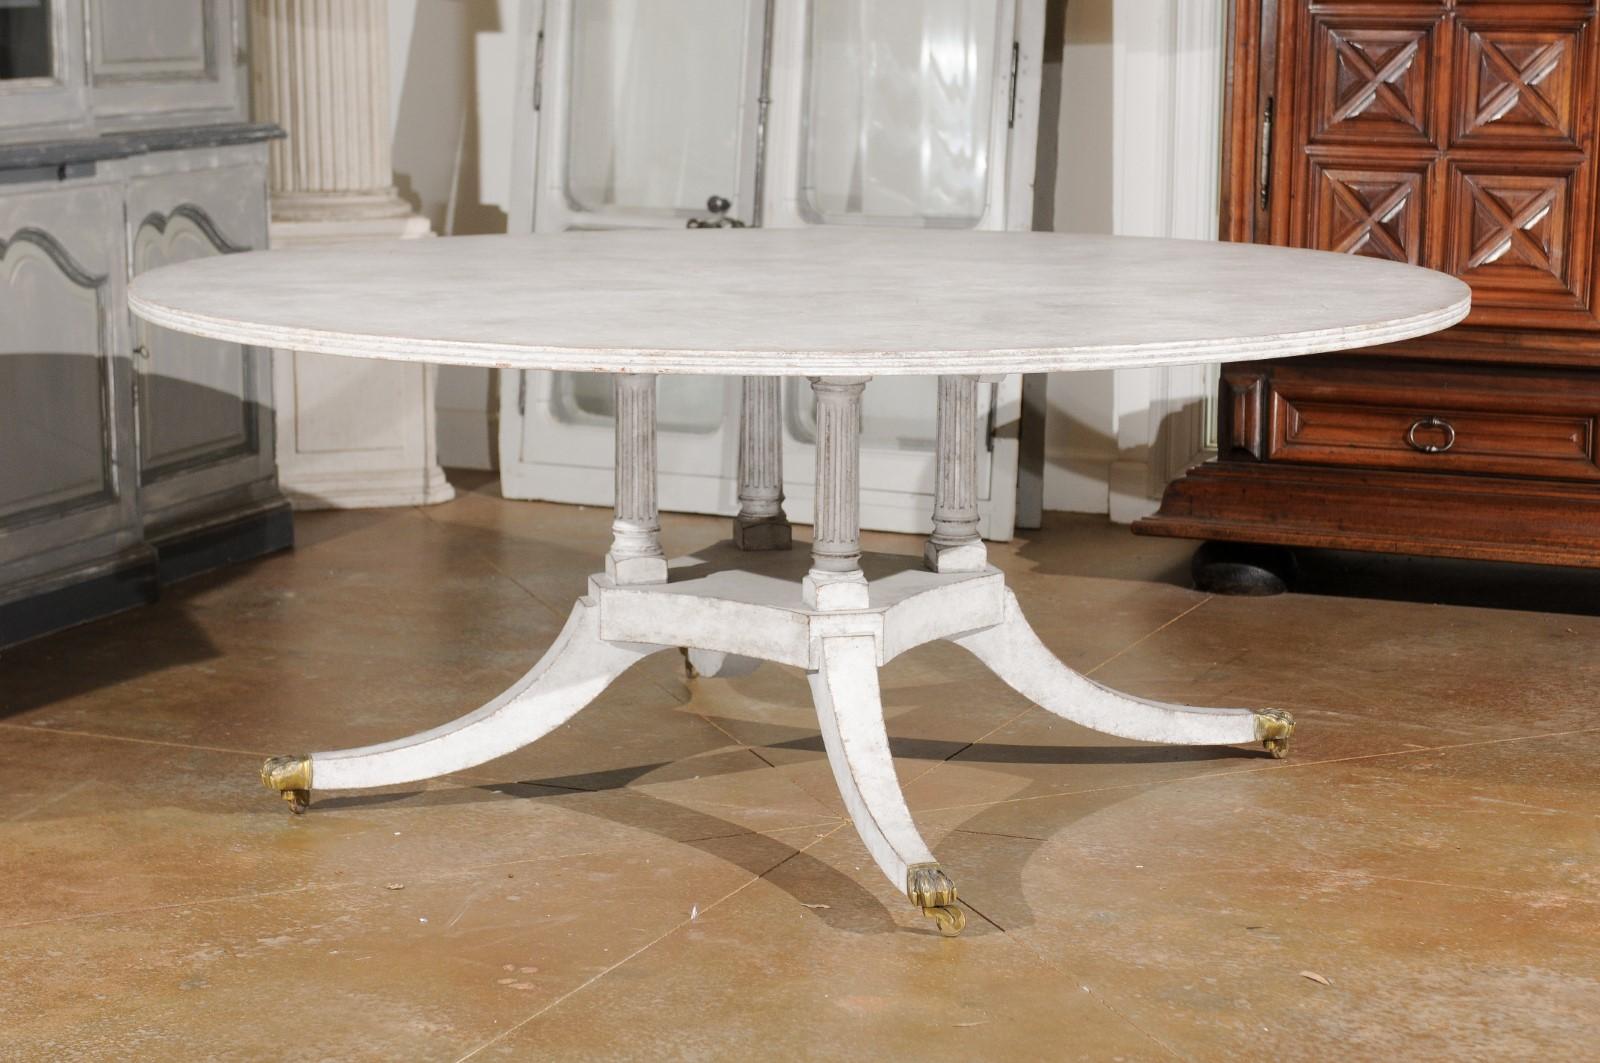 European Regency Style Painted Wood Round Top Table with Brass Paw Feet and Casters